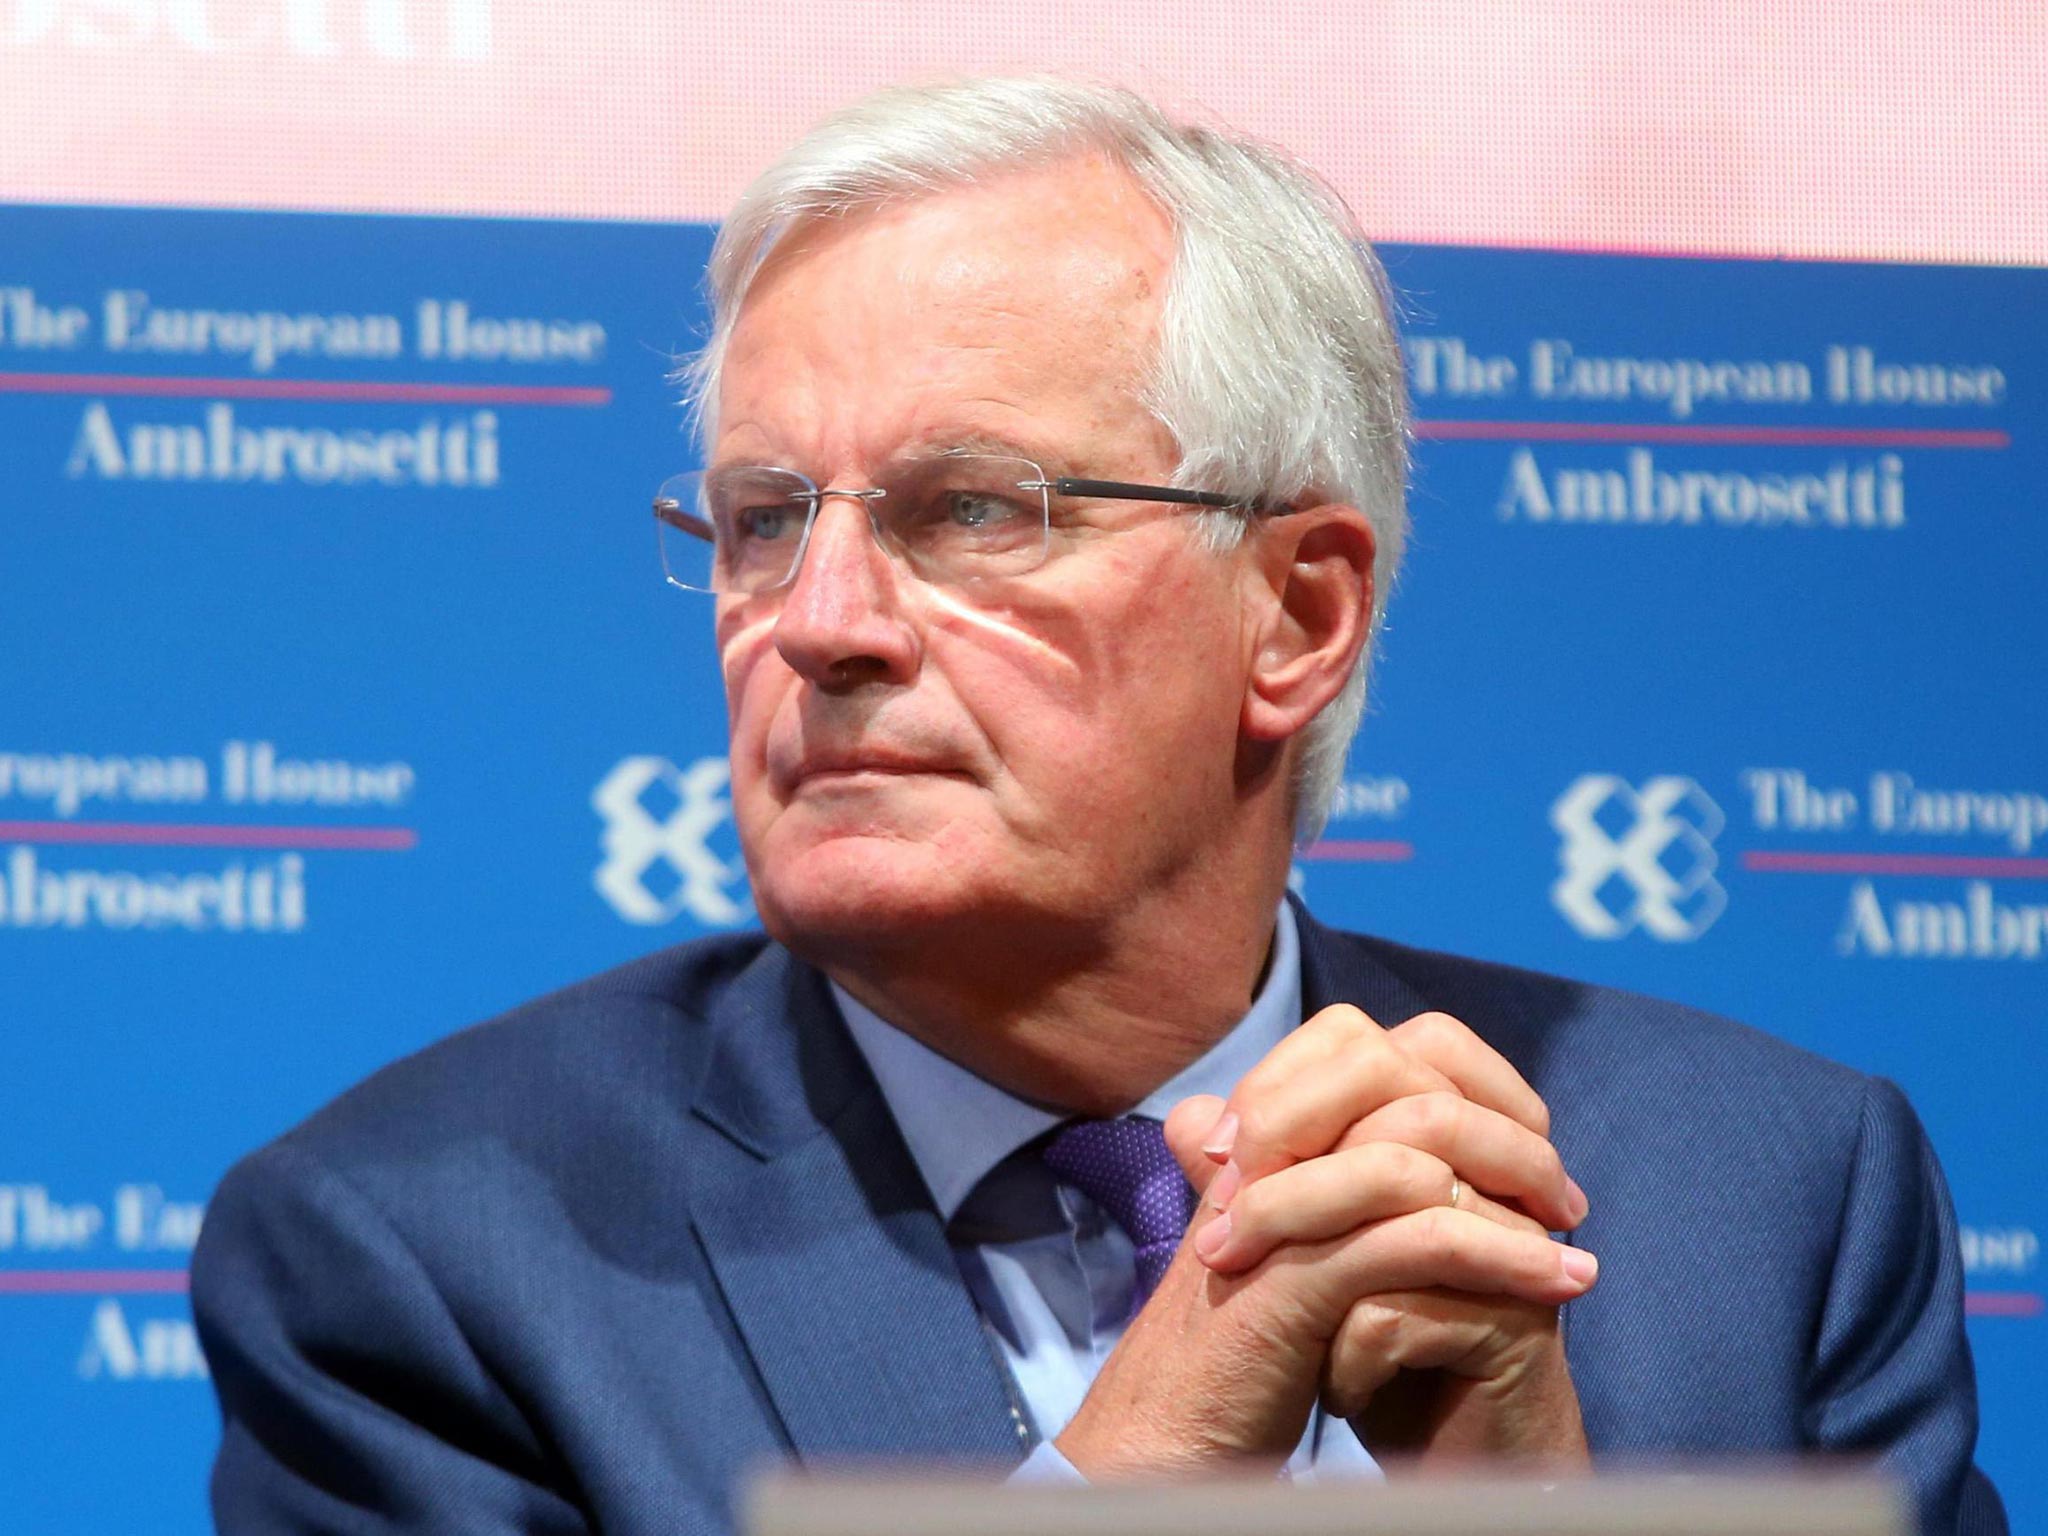 Michel Barnier has called on the UK to up its financial offer if it wants to the talks to succeed